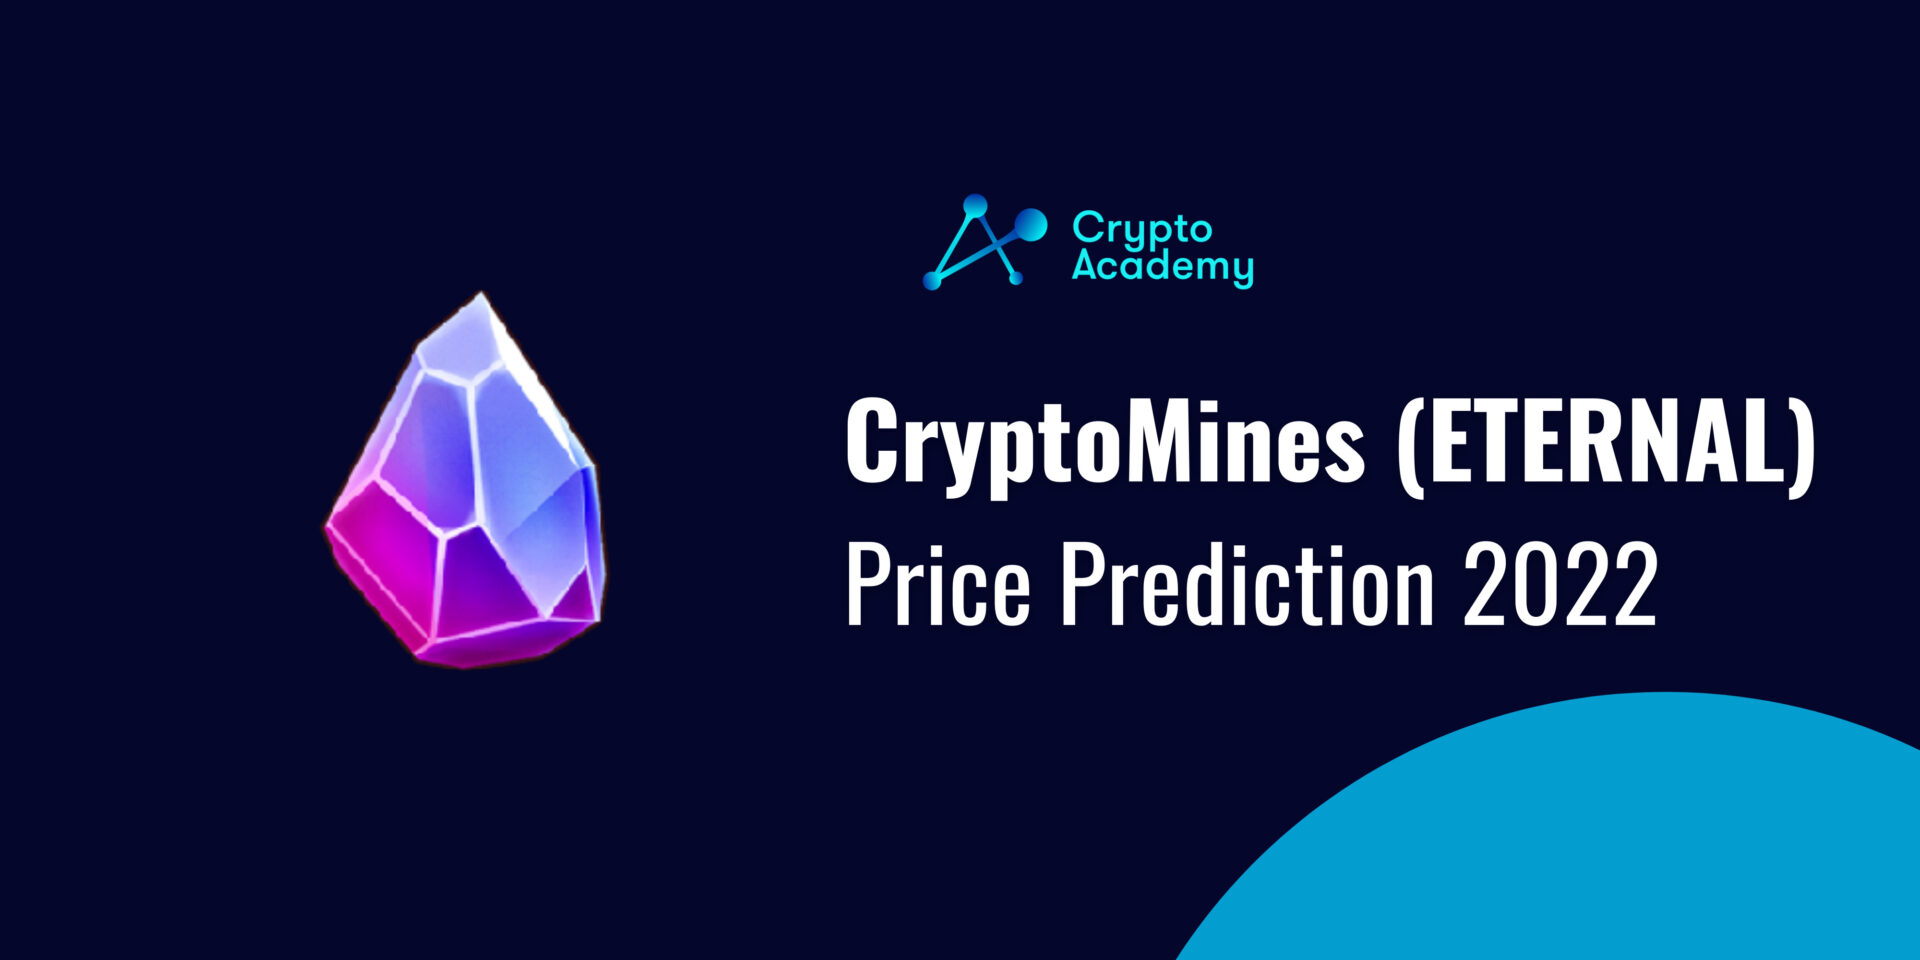 CryptoMines (ETERNAL) Price Prediction 2022 and Beyond – Will Eternal Reach $1000?